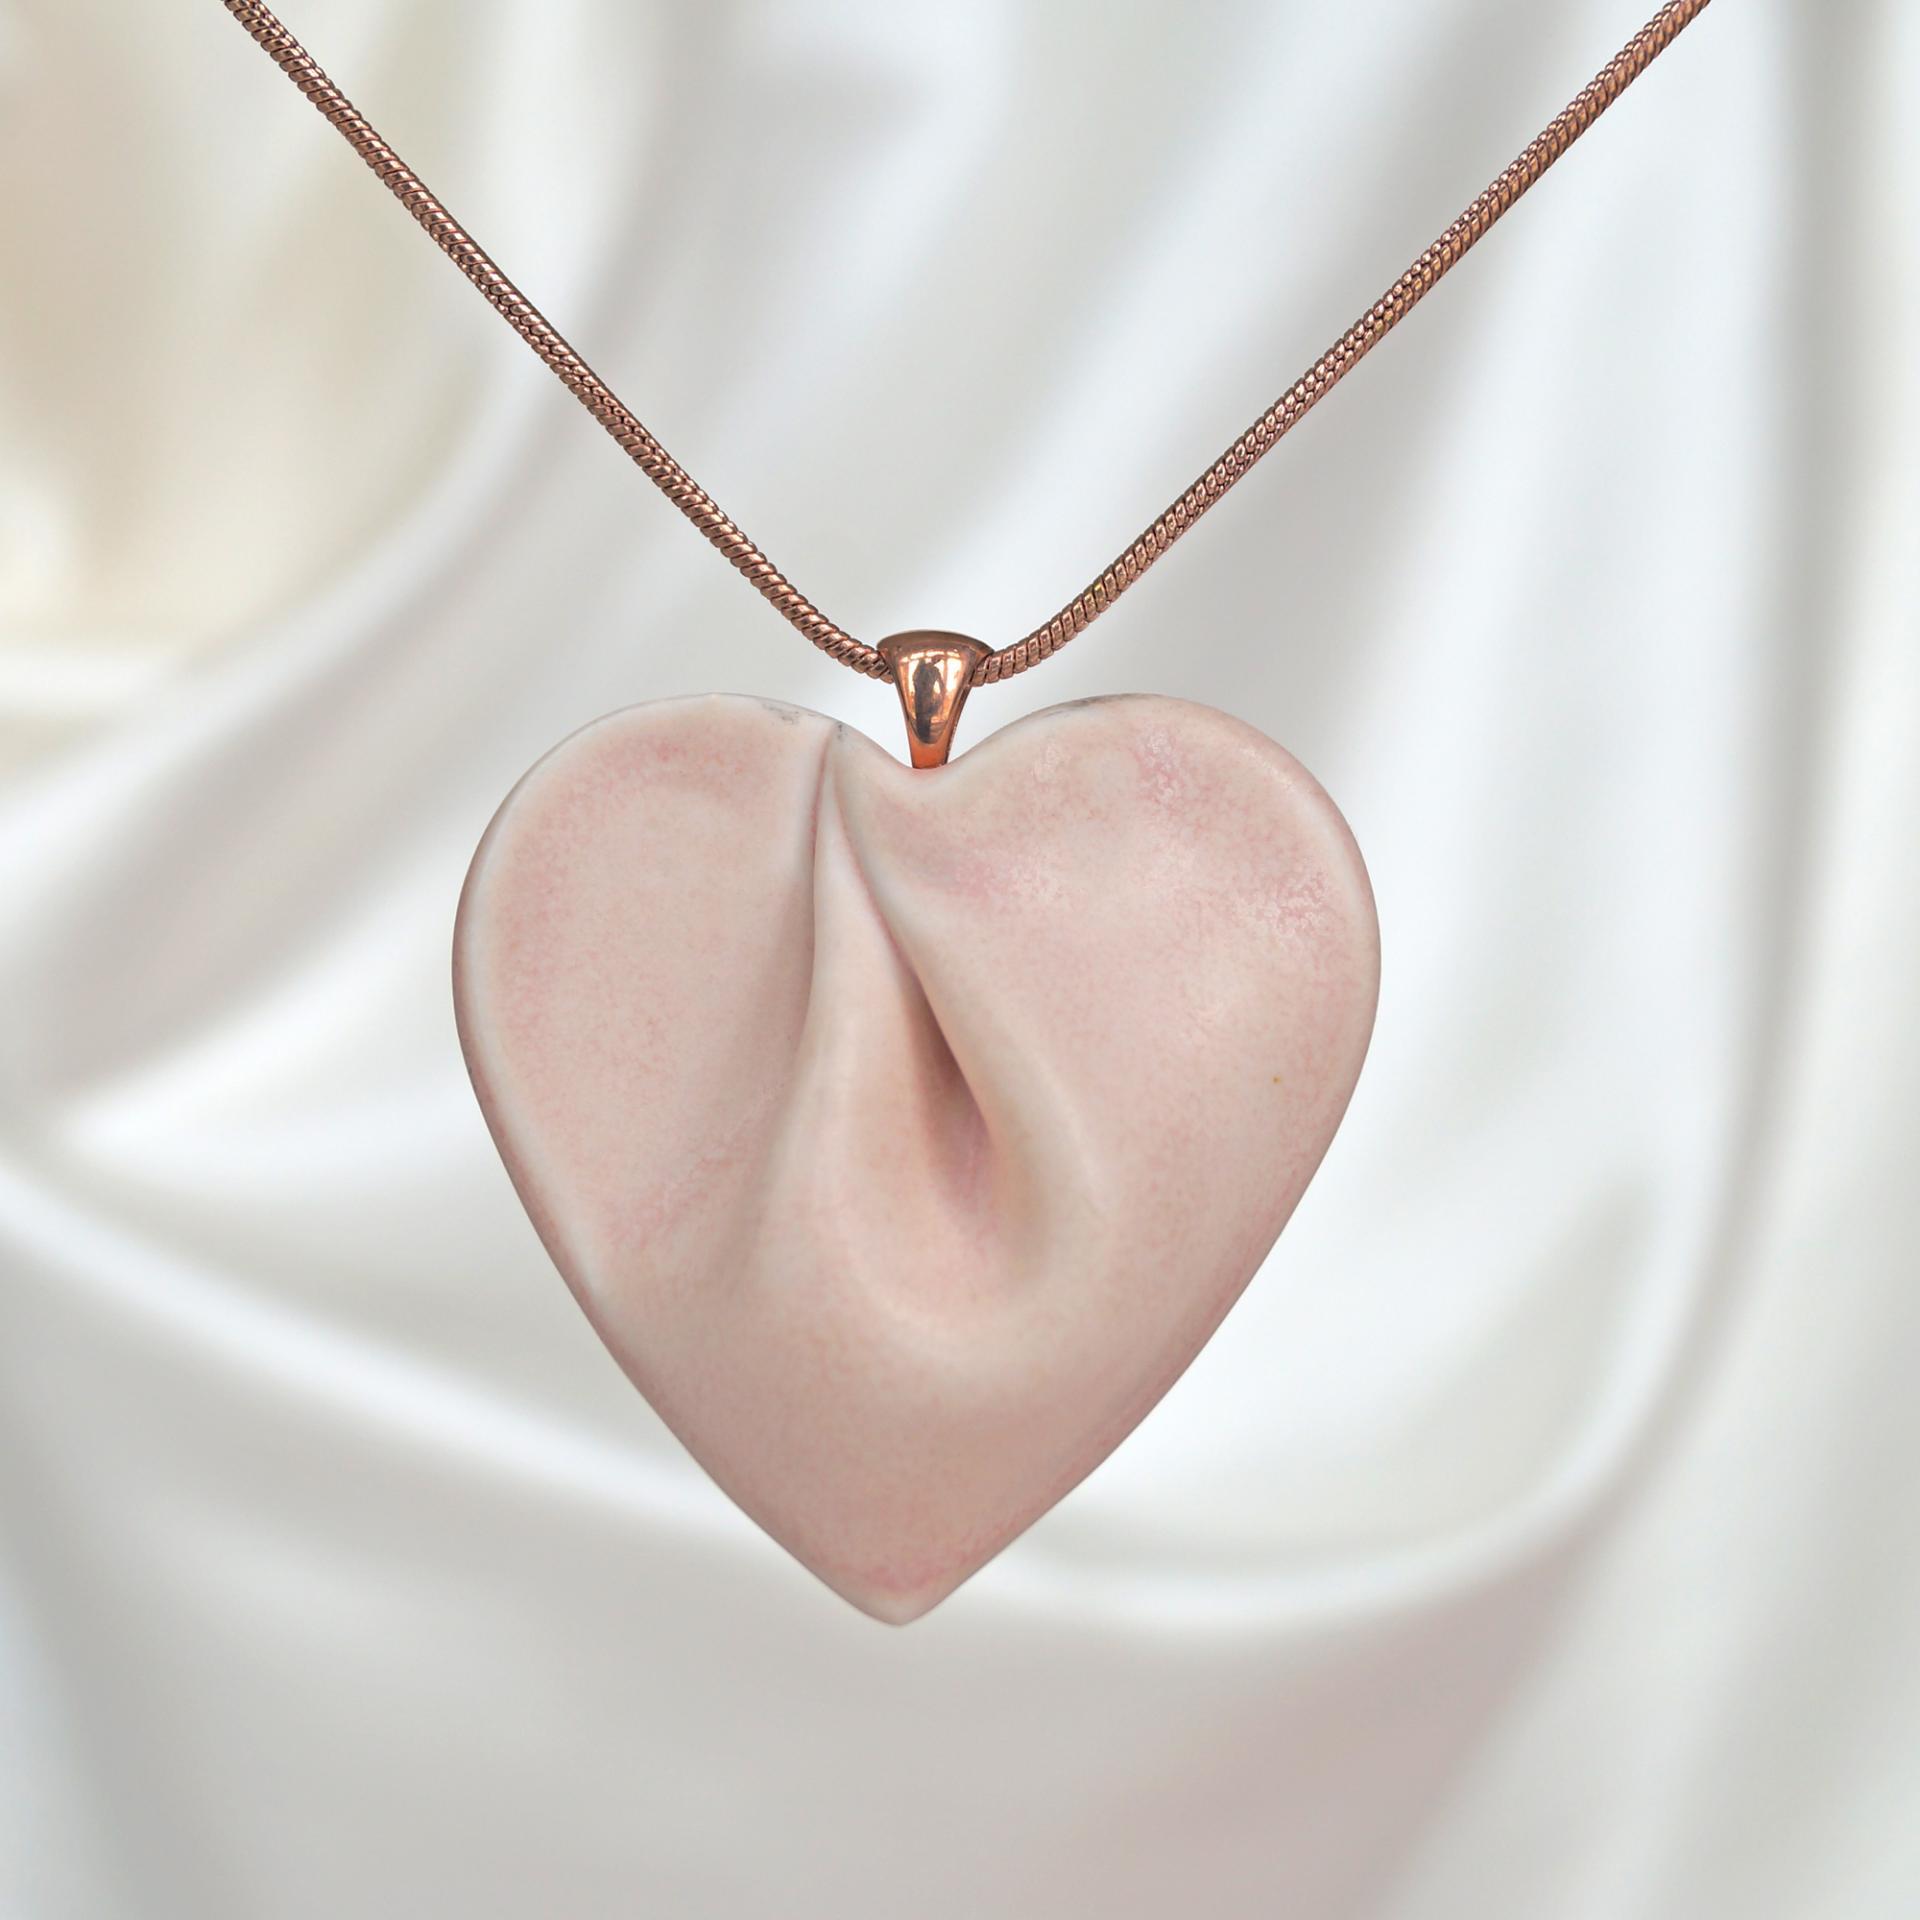 Draped HEART necklace, large pink porcelain heart necklace, hand made jewellery, rose gold chain, porcelain gift, rose gold s